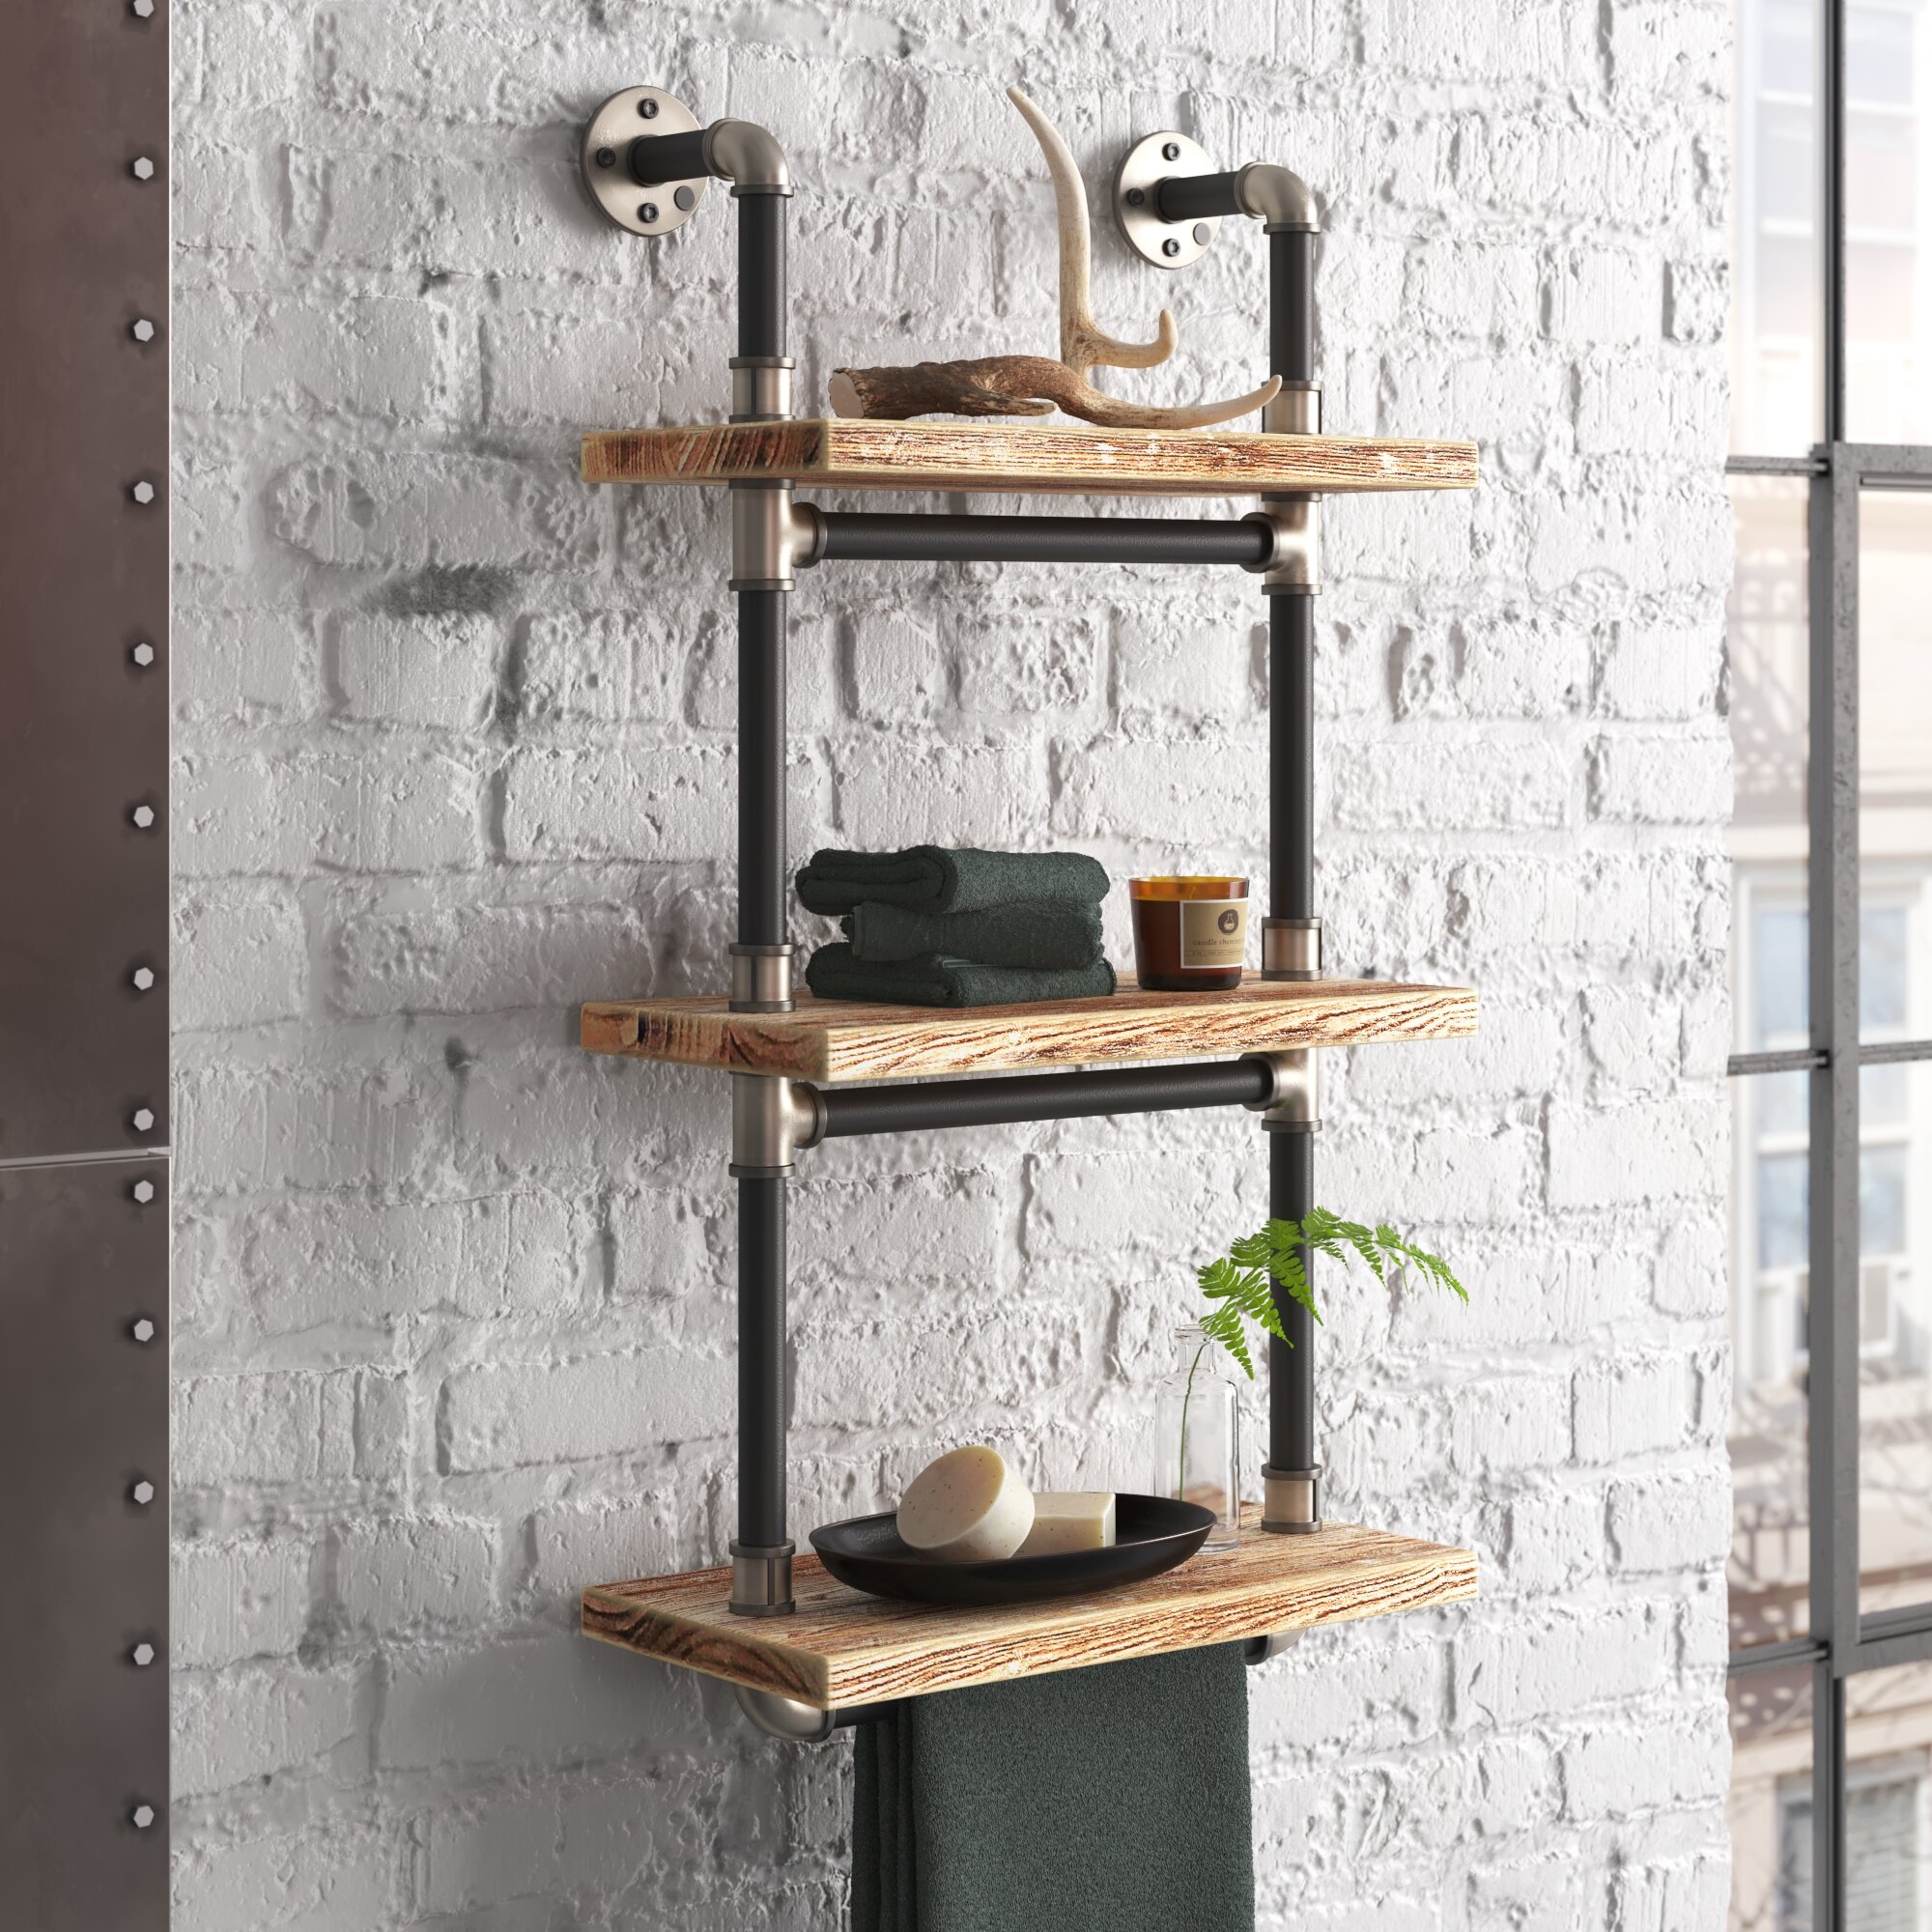 3 Tier Retro Wall Hanging Wall Shelf Wooden Floating Display Shelves 